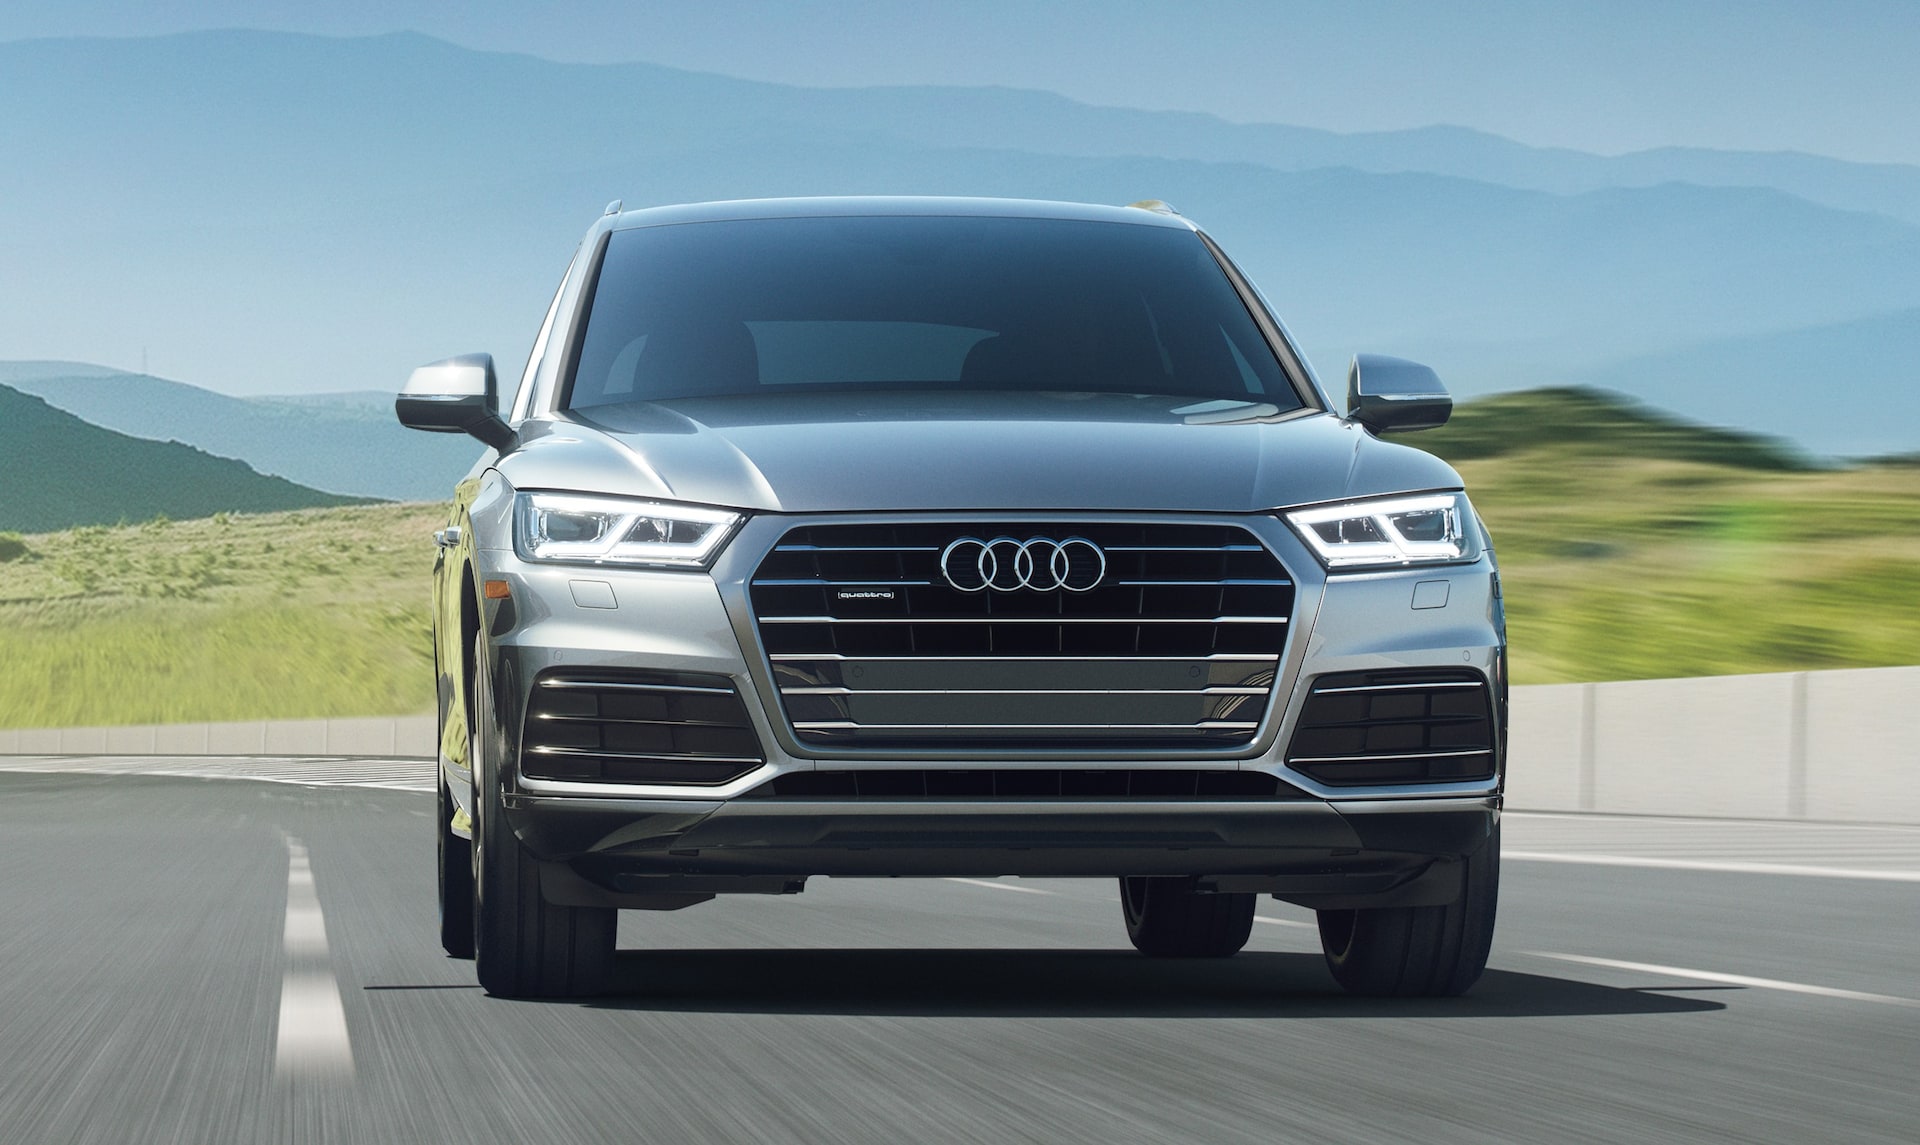 2020 Audi Q5 Prices, Reviews, and Photos - MotorTrend